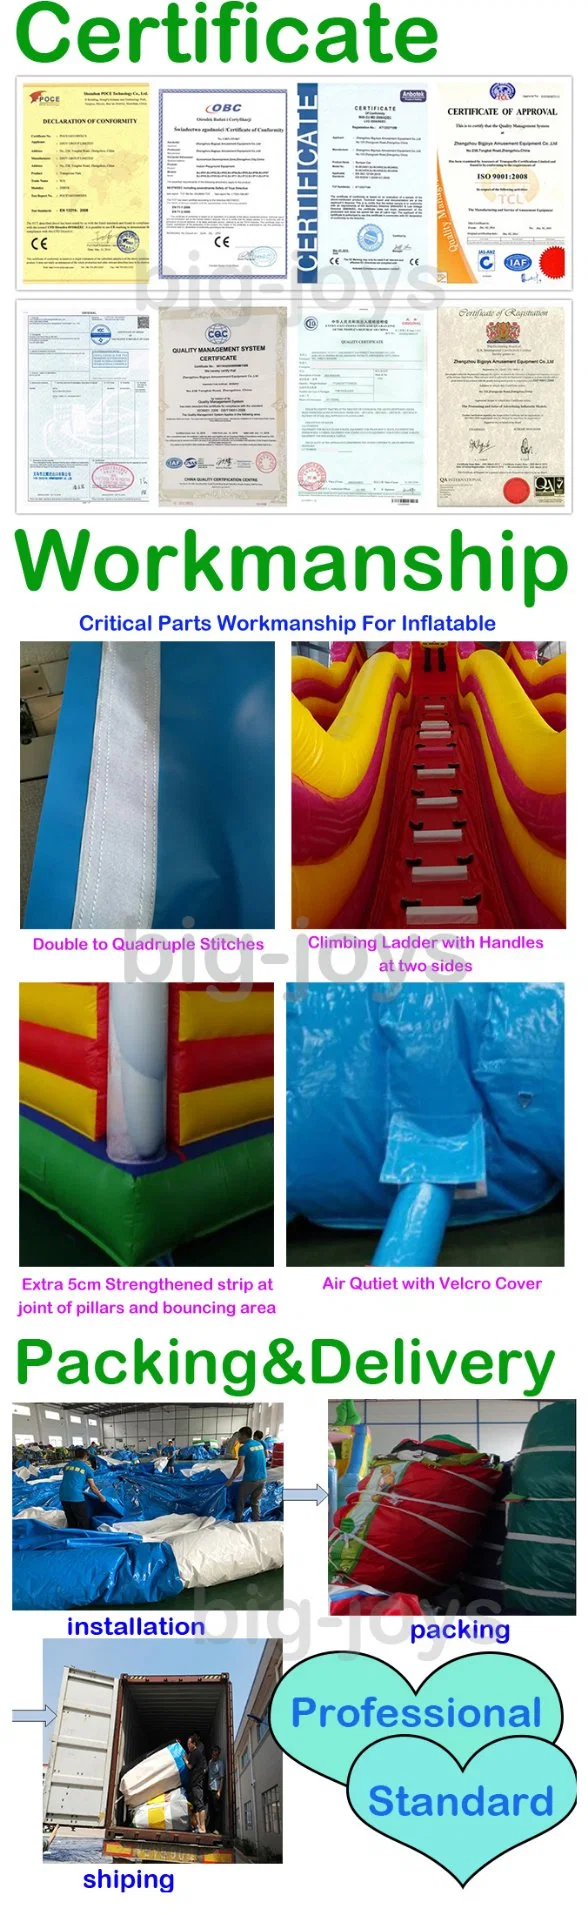 Big Inflatable Fun City Slide for Kids Factory Direct Sales